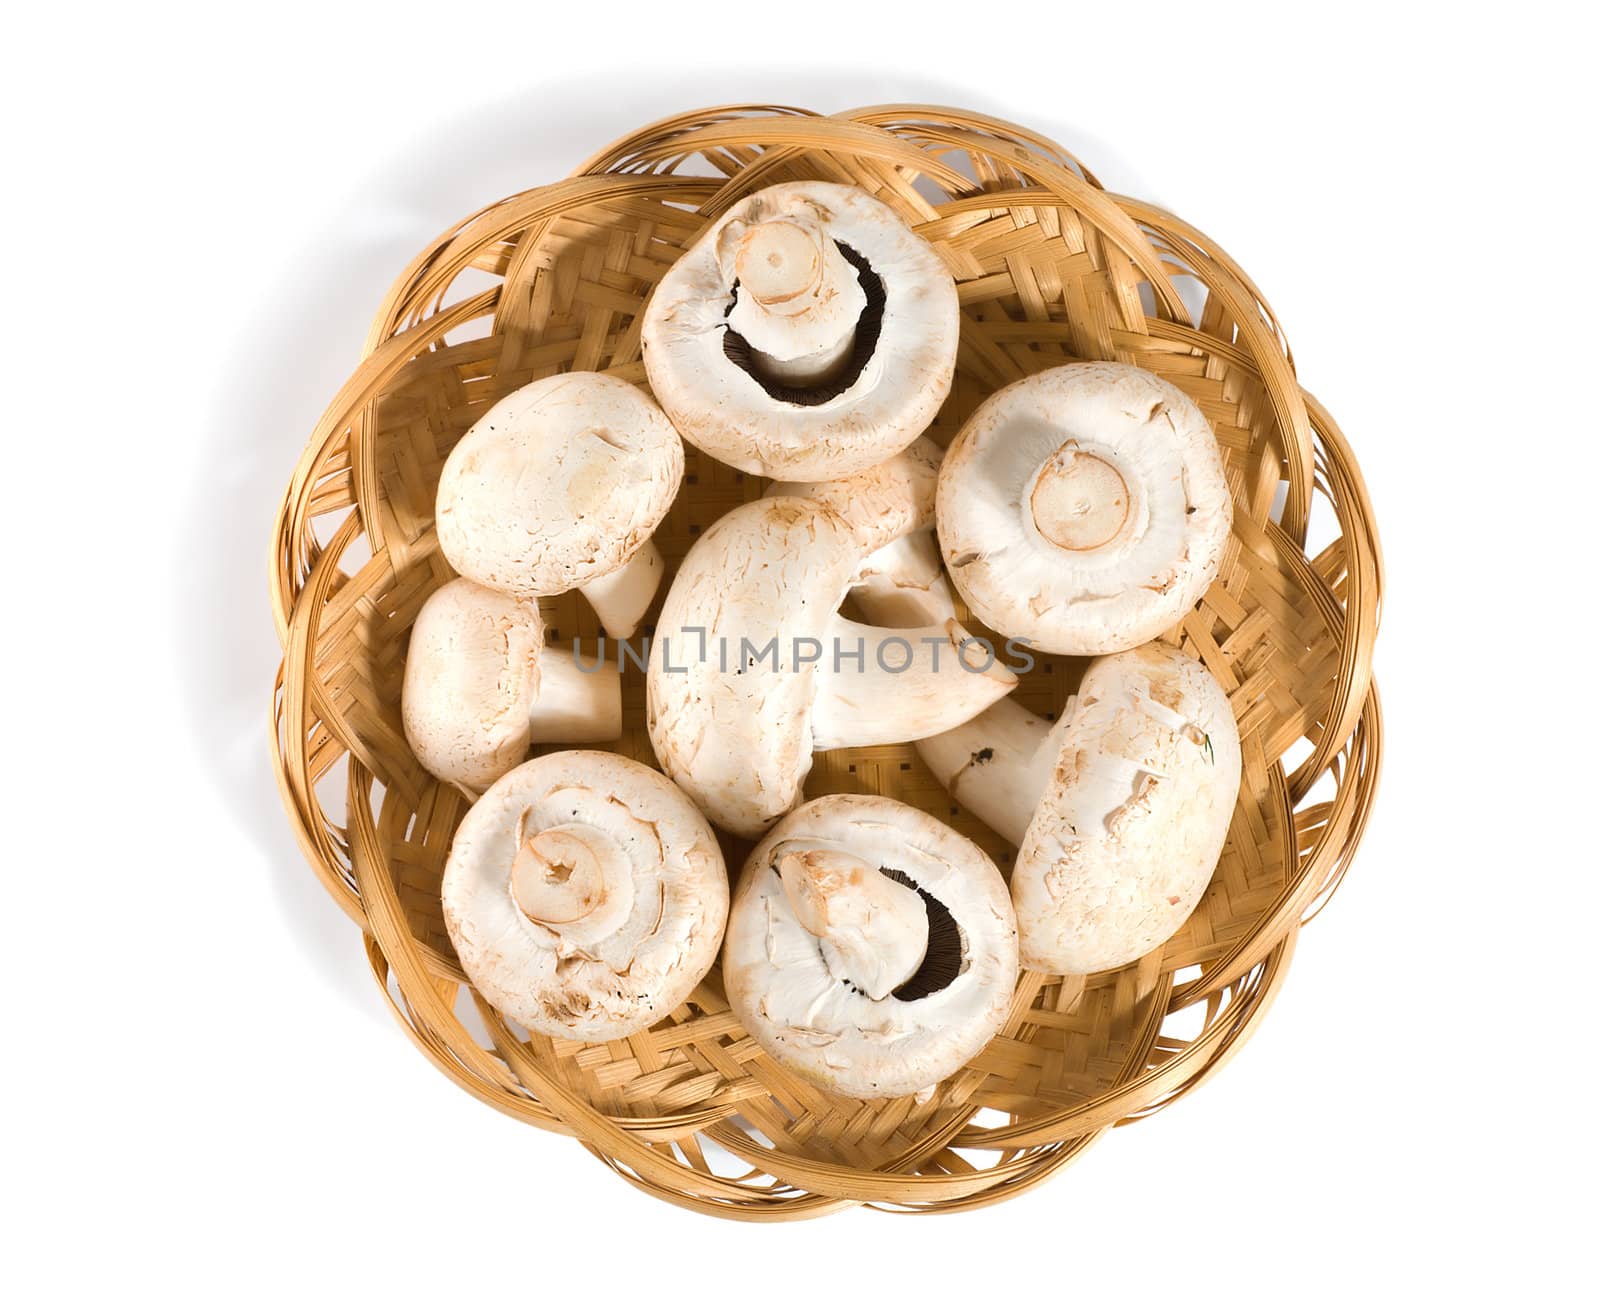 Mushrooms in a wooden basket by Givaga